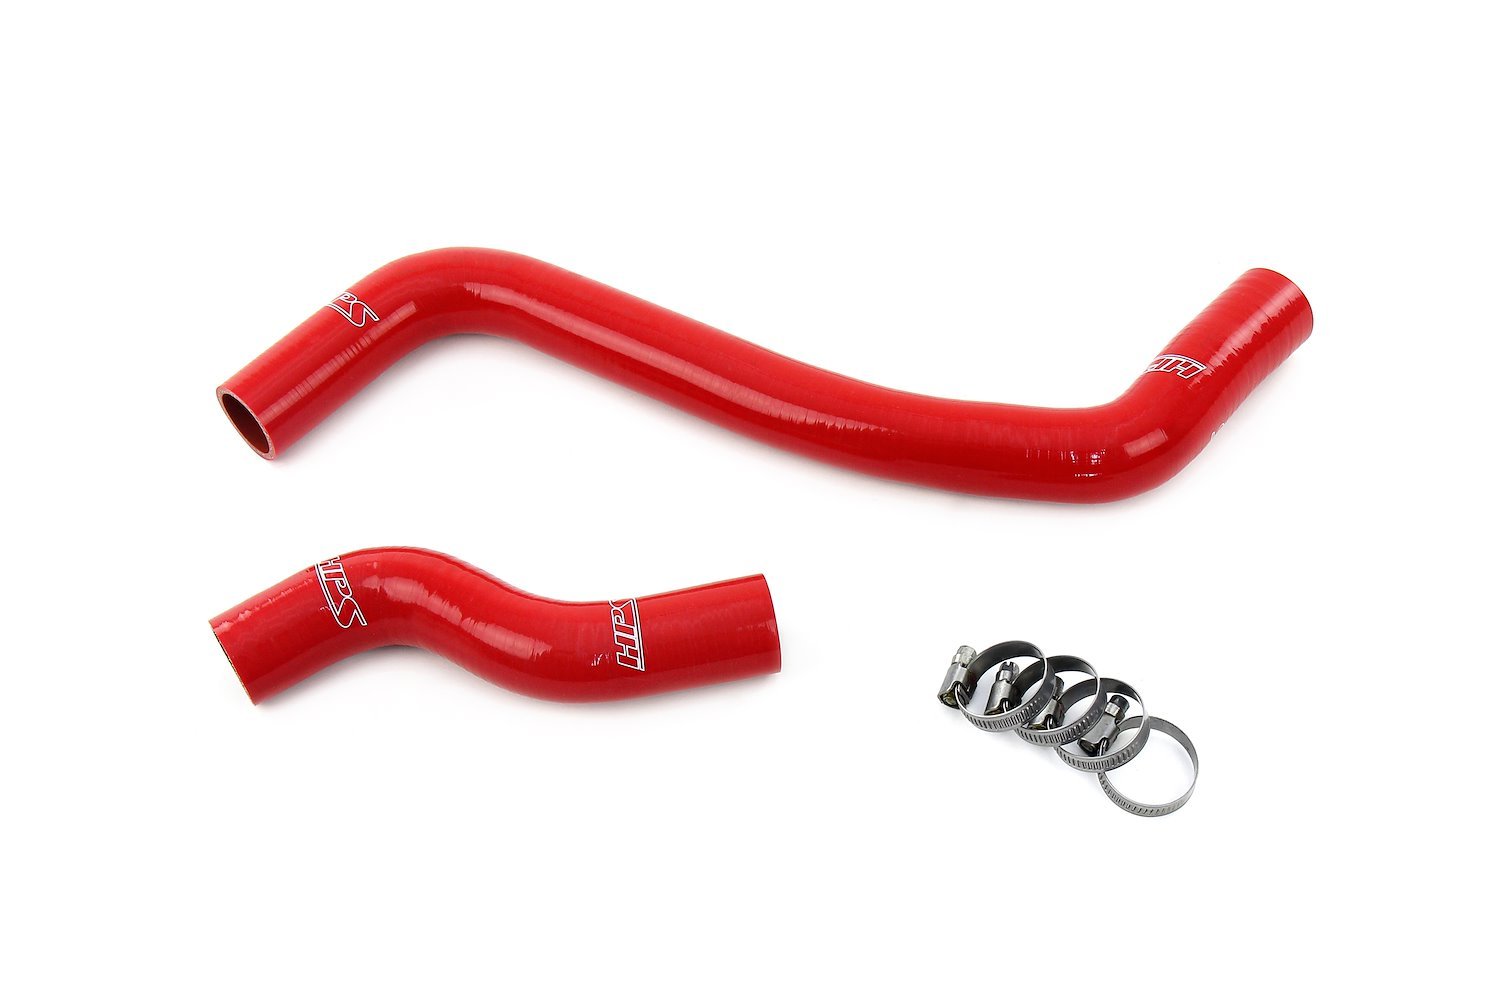 57-2124-RED Radiator Hose Kit, 3-Ply Reinforced Silicone, Replaces Rubber Radiator Coolant Hoses